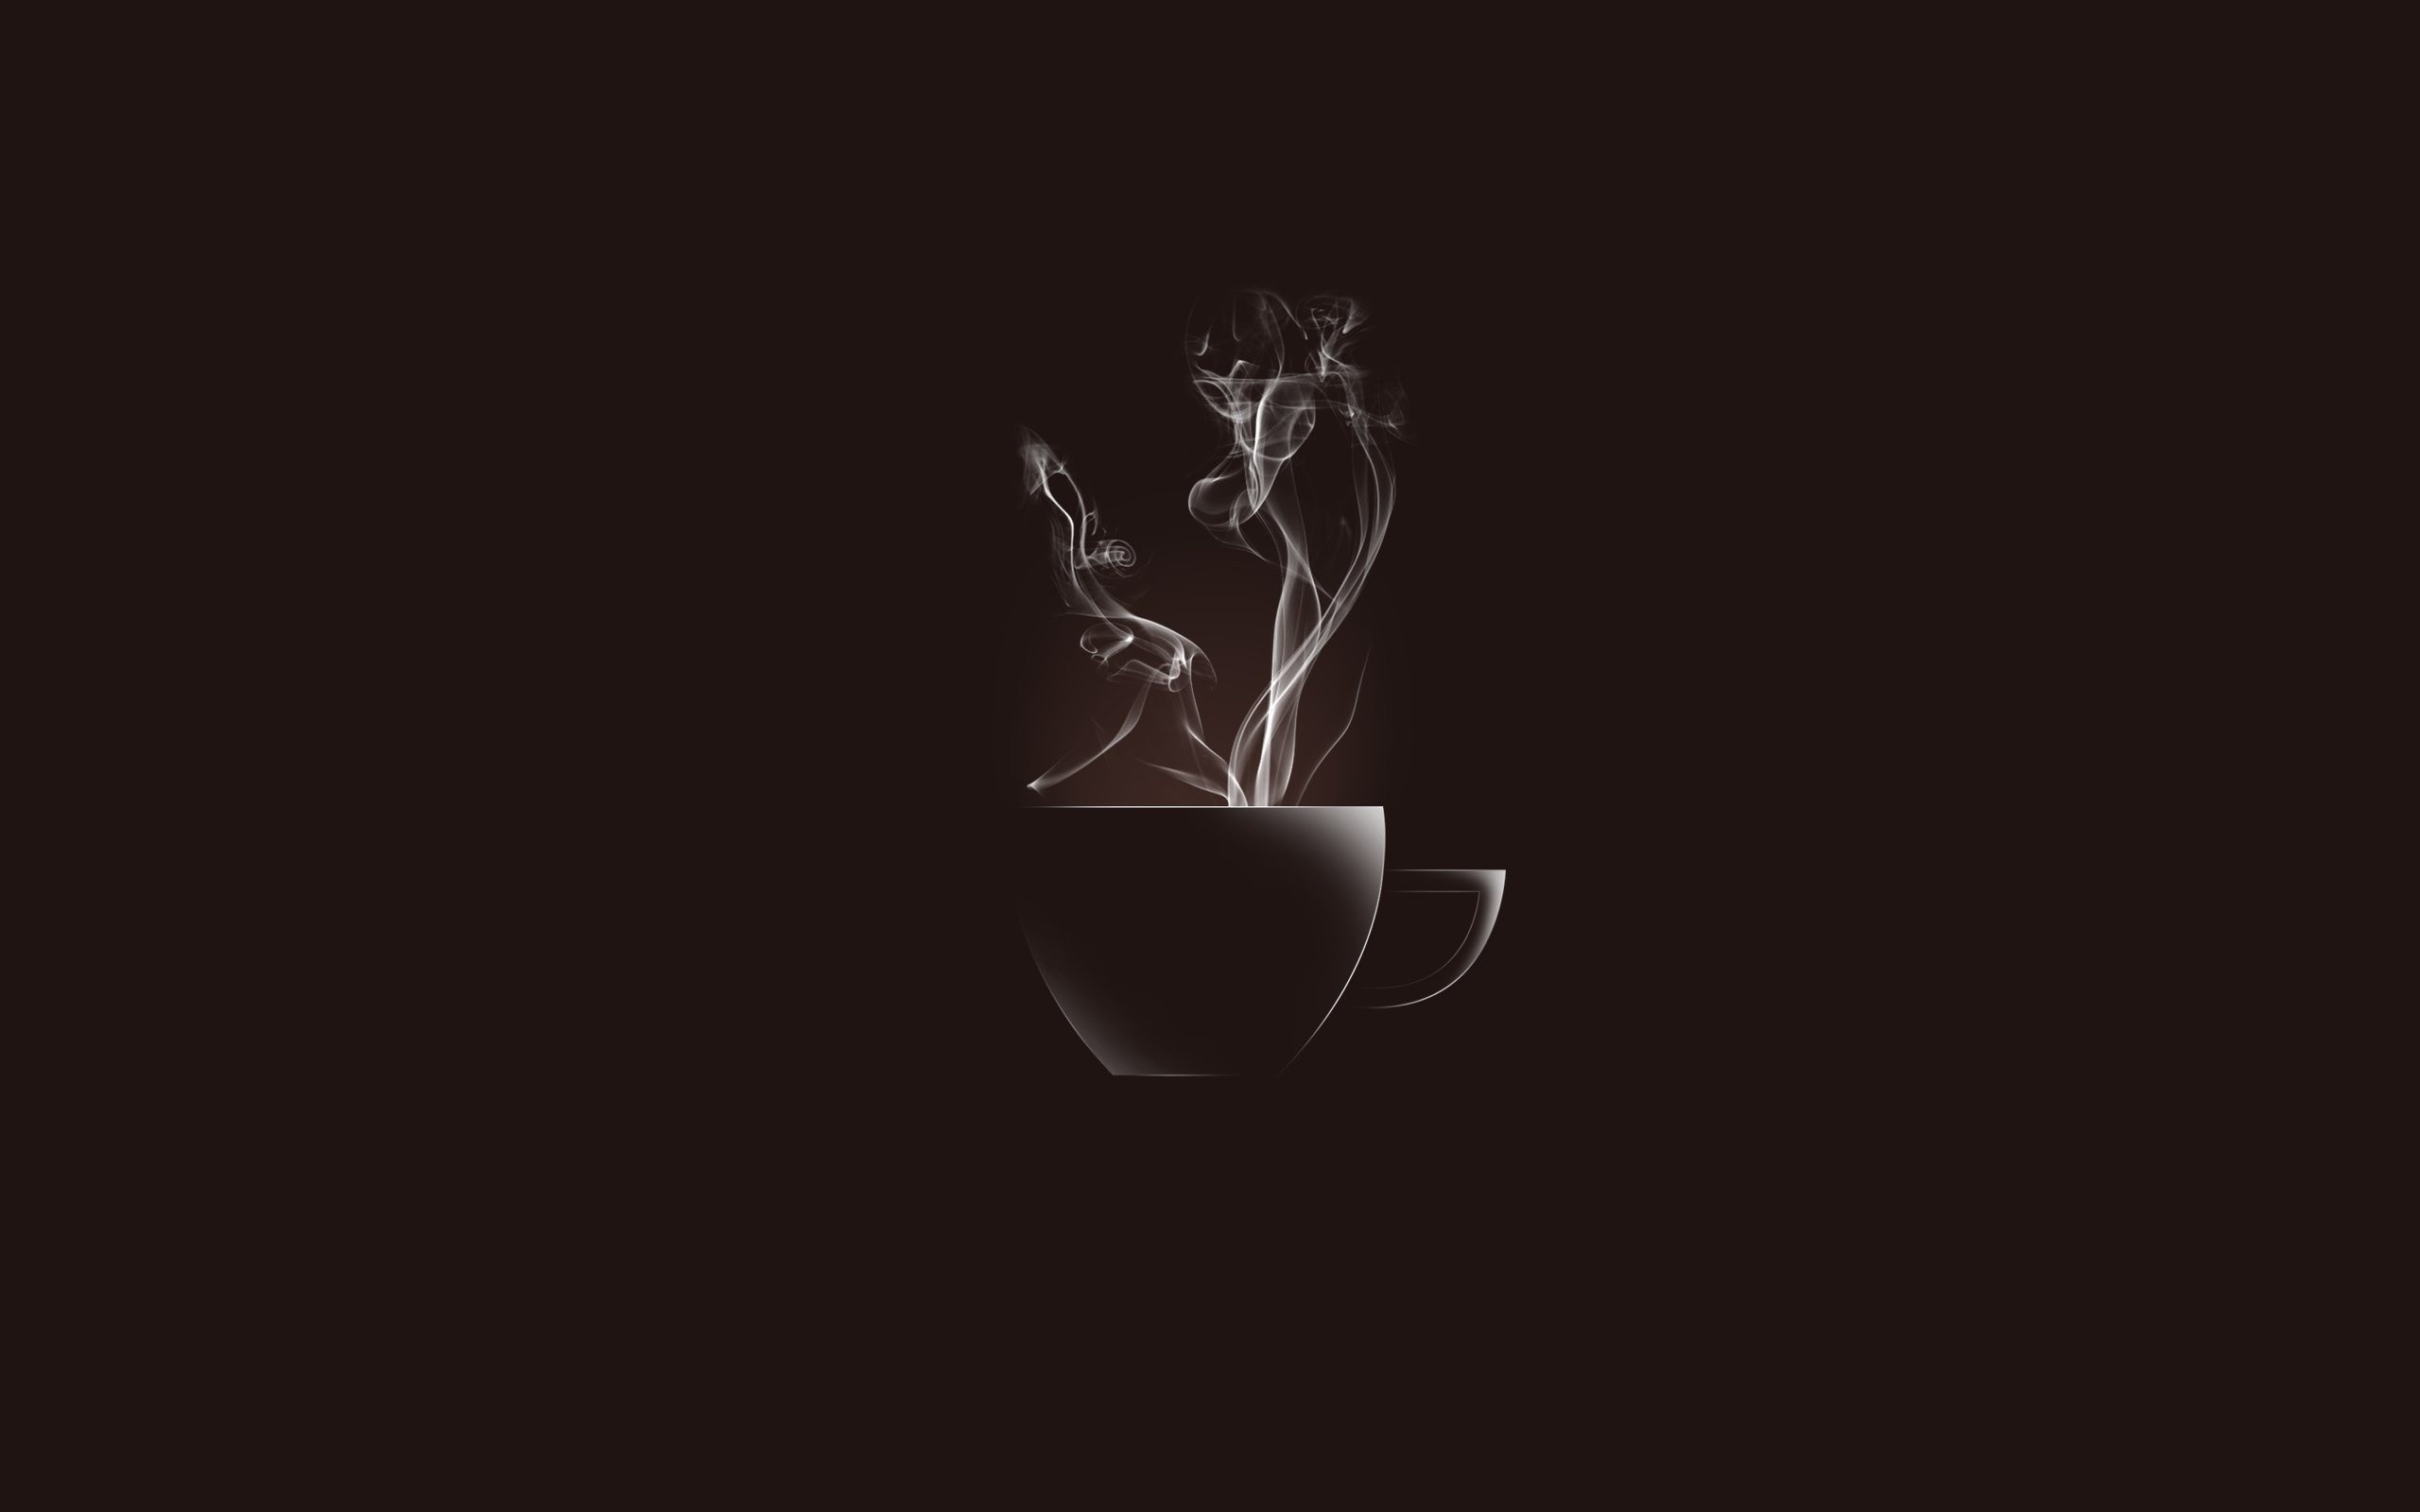 Coffee cup wallpaper collection, Variety of coffee cups, Backgrounds for coffee lovers, Coffee-themed delight, 2560x1600 HD Desktop